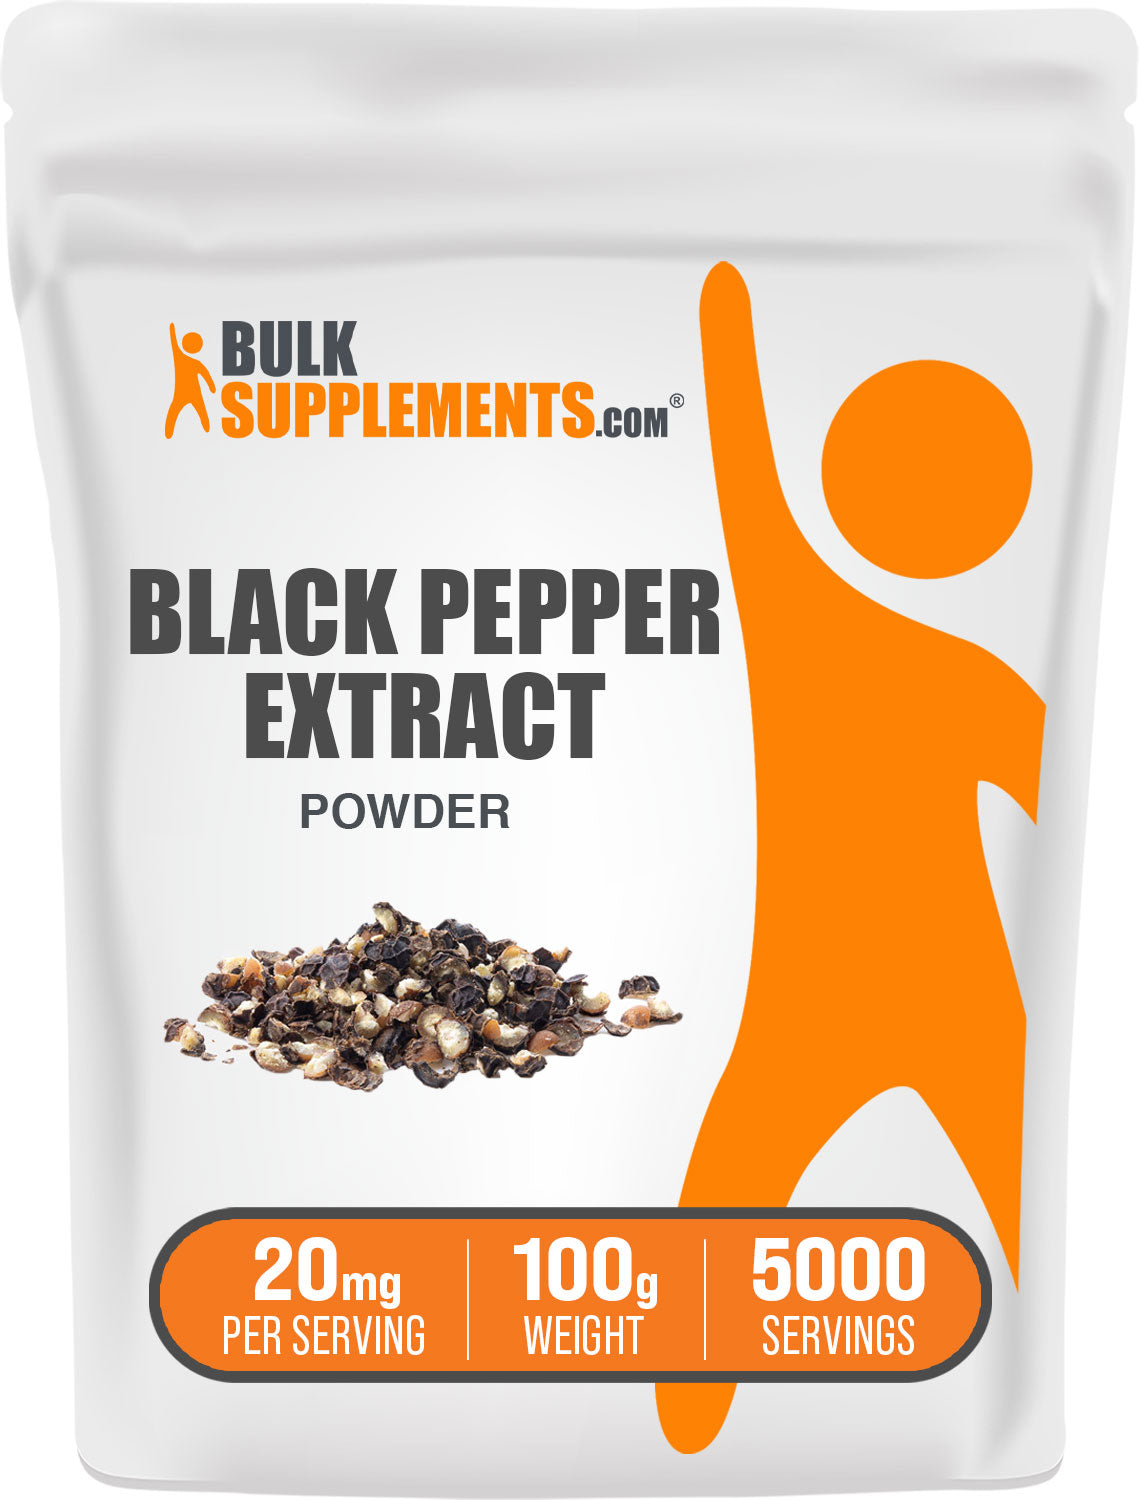 Black pepper extract for natural remedy